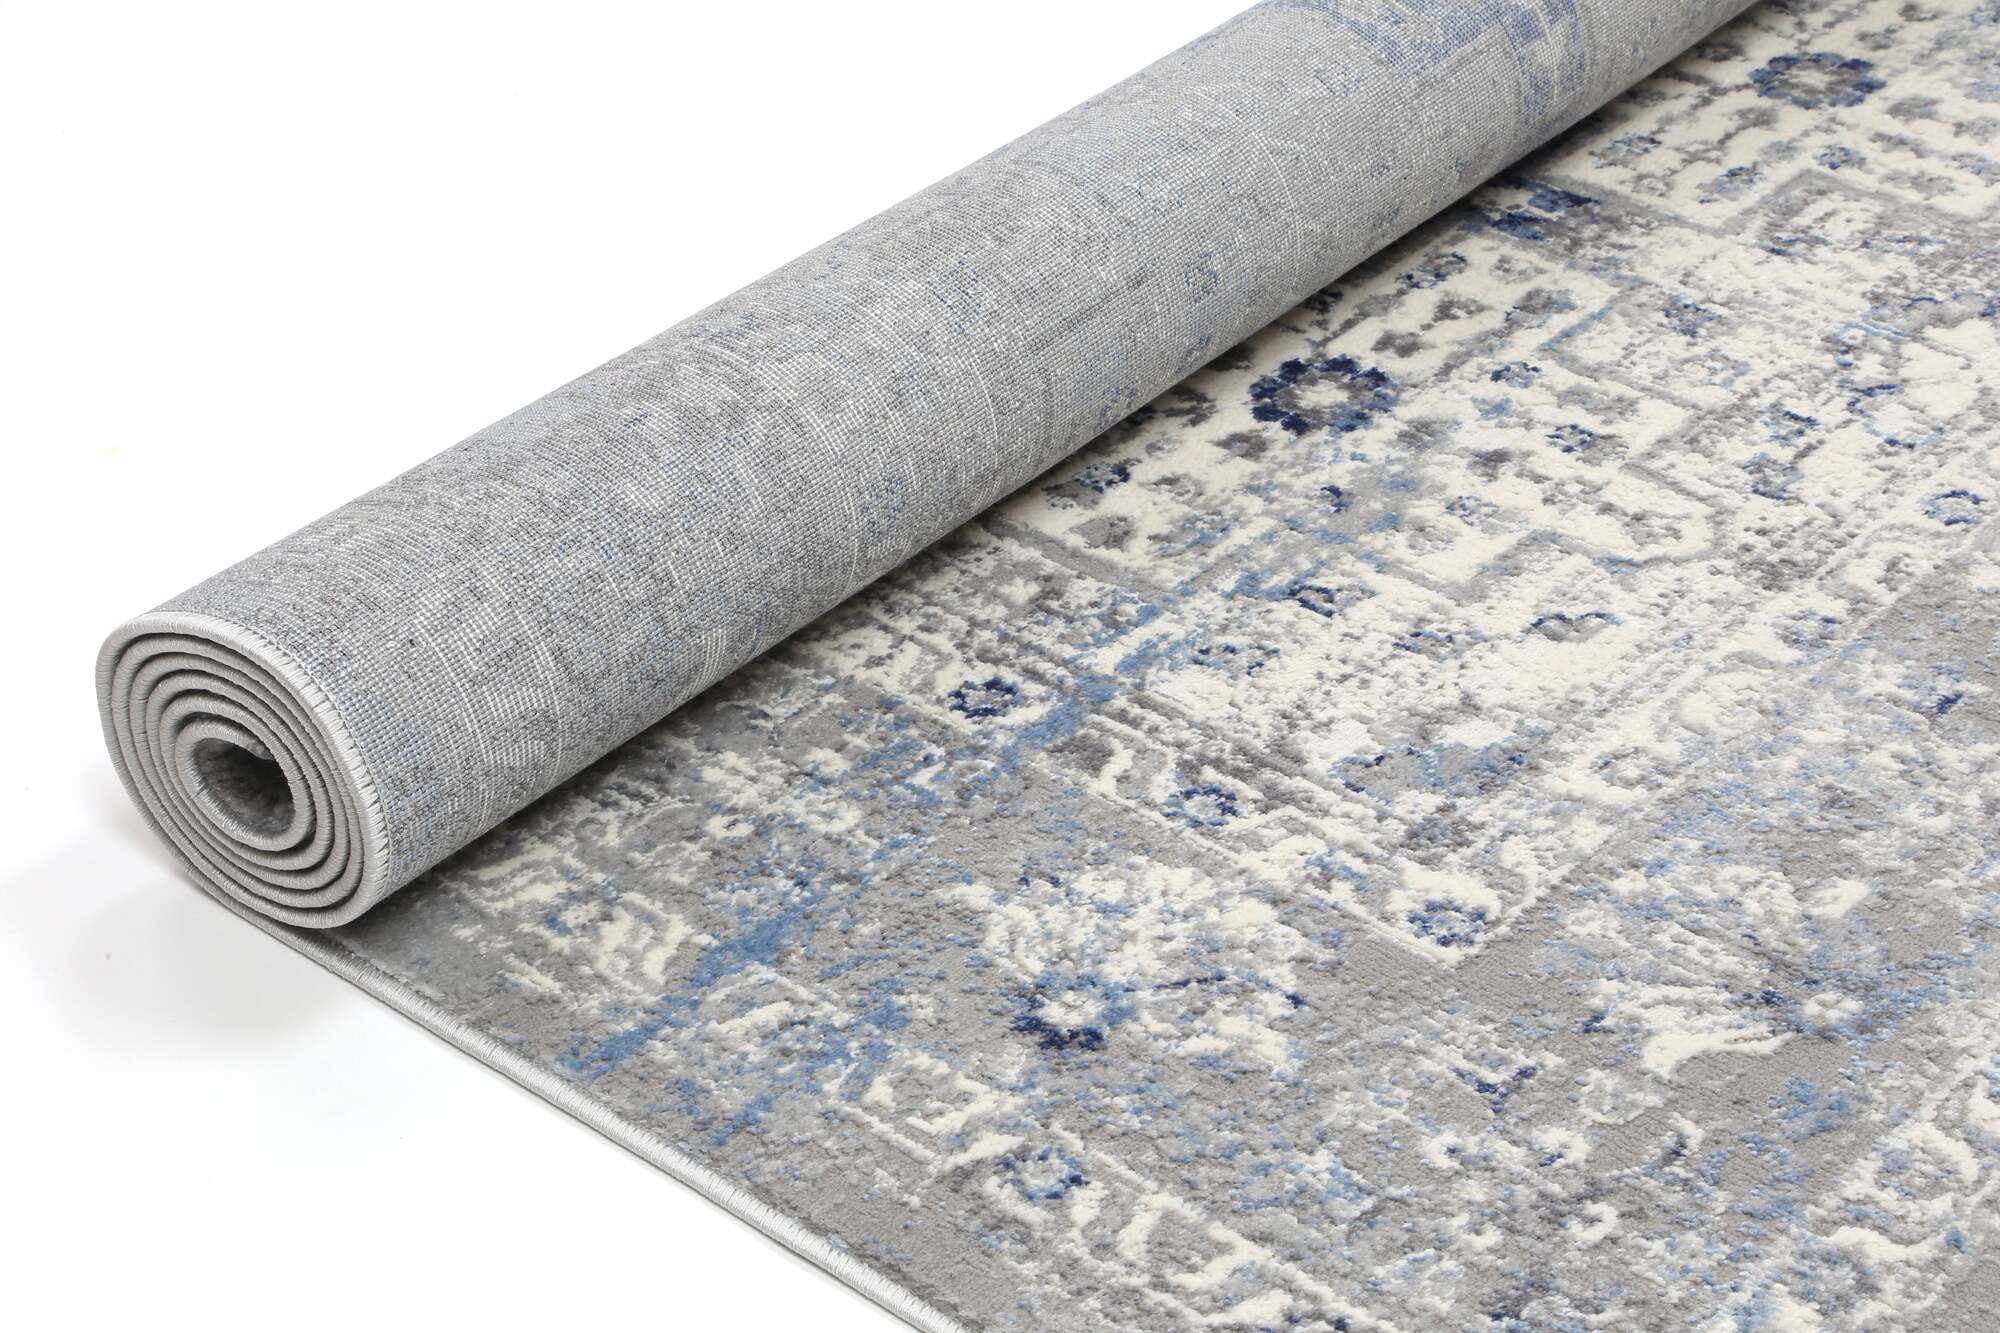 Elvis Traditional Overdyed Rug